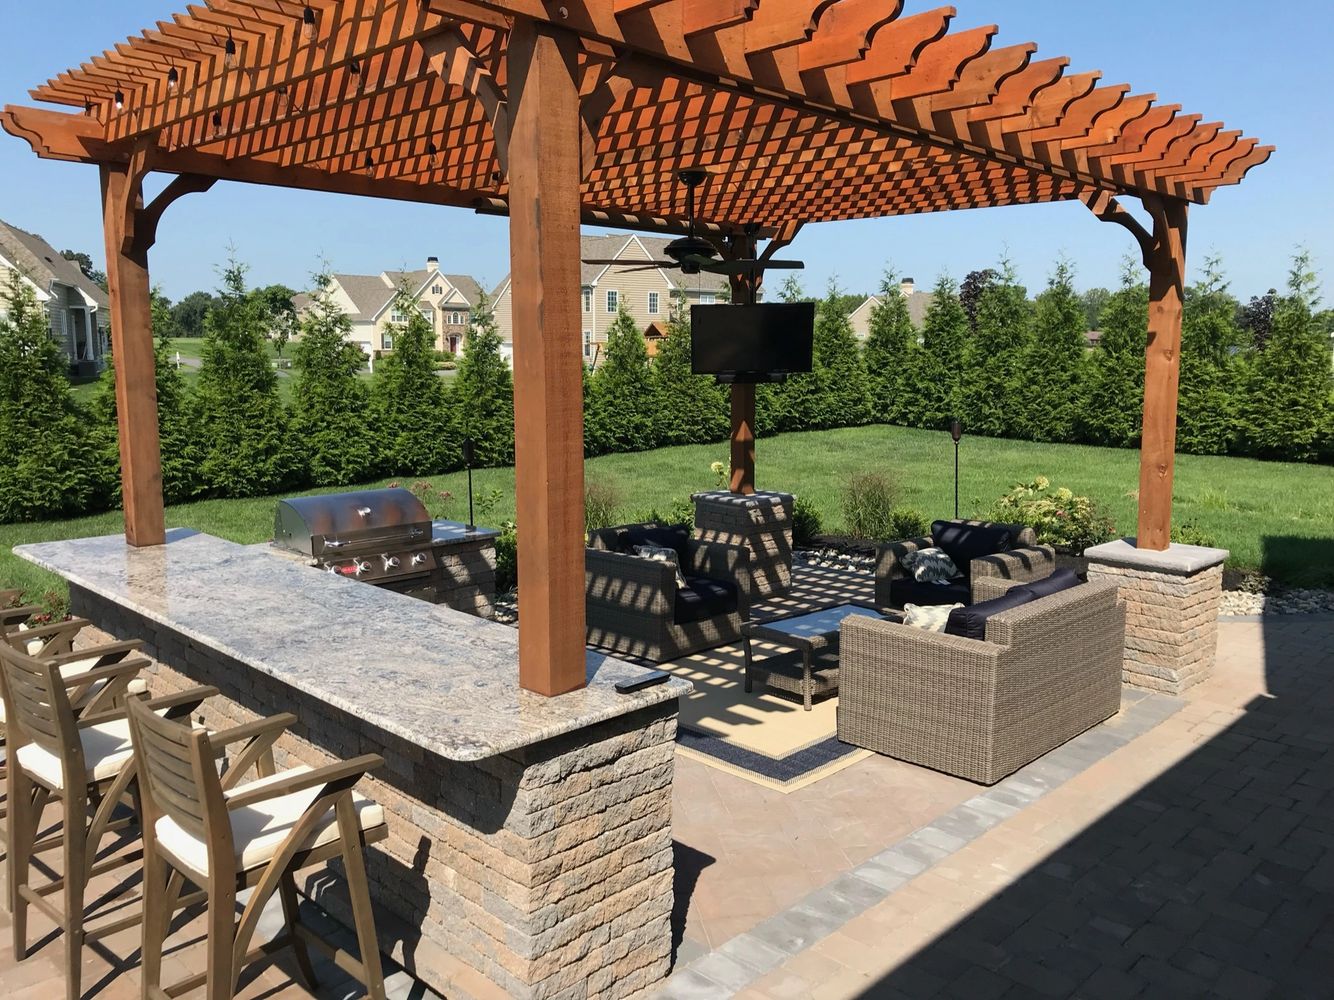 Paver patio with outdoor kitchen and cedar pergola